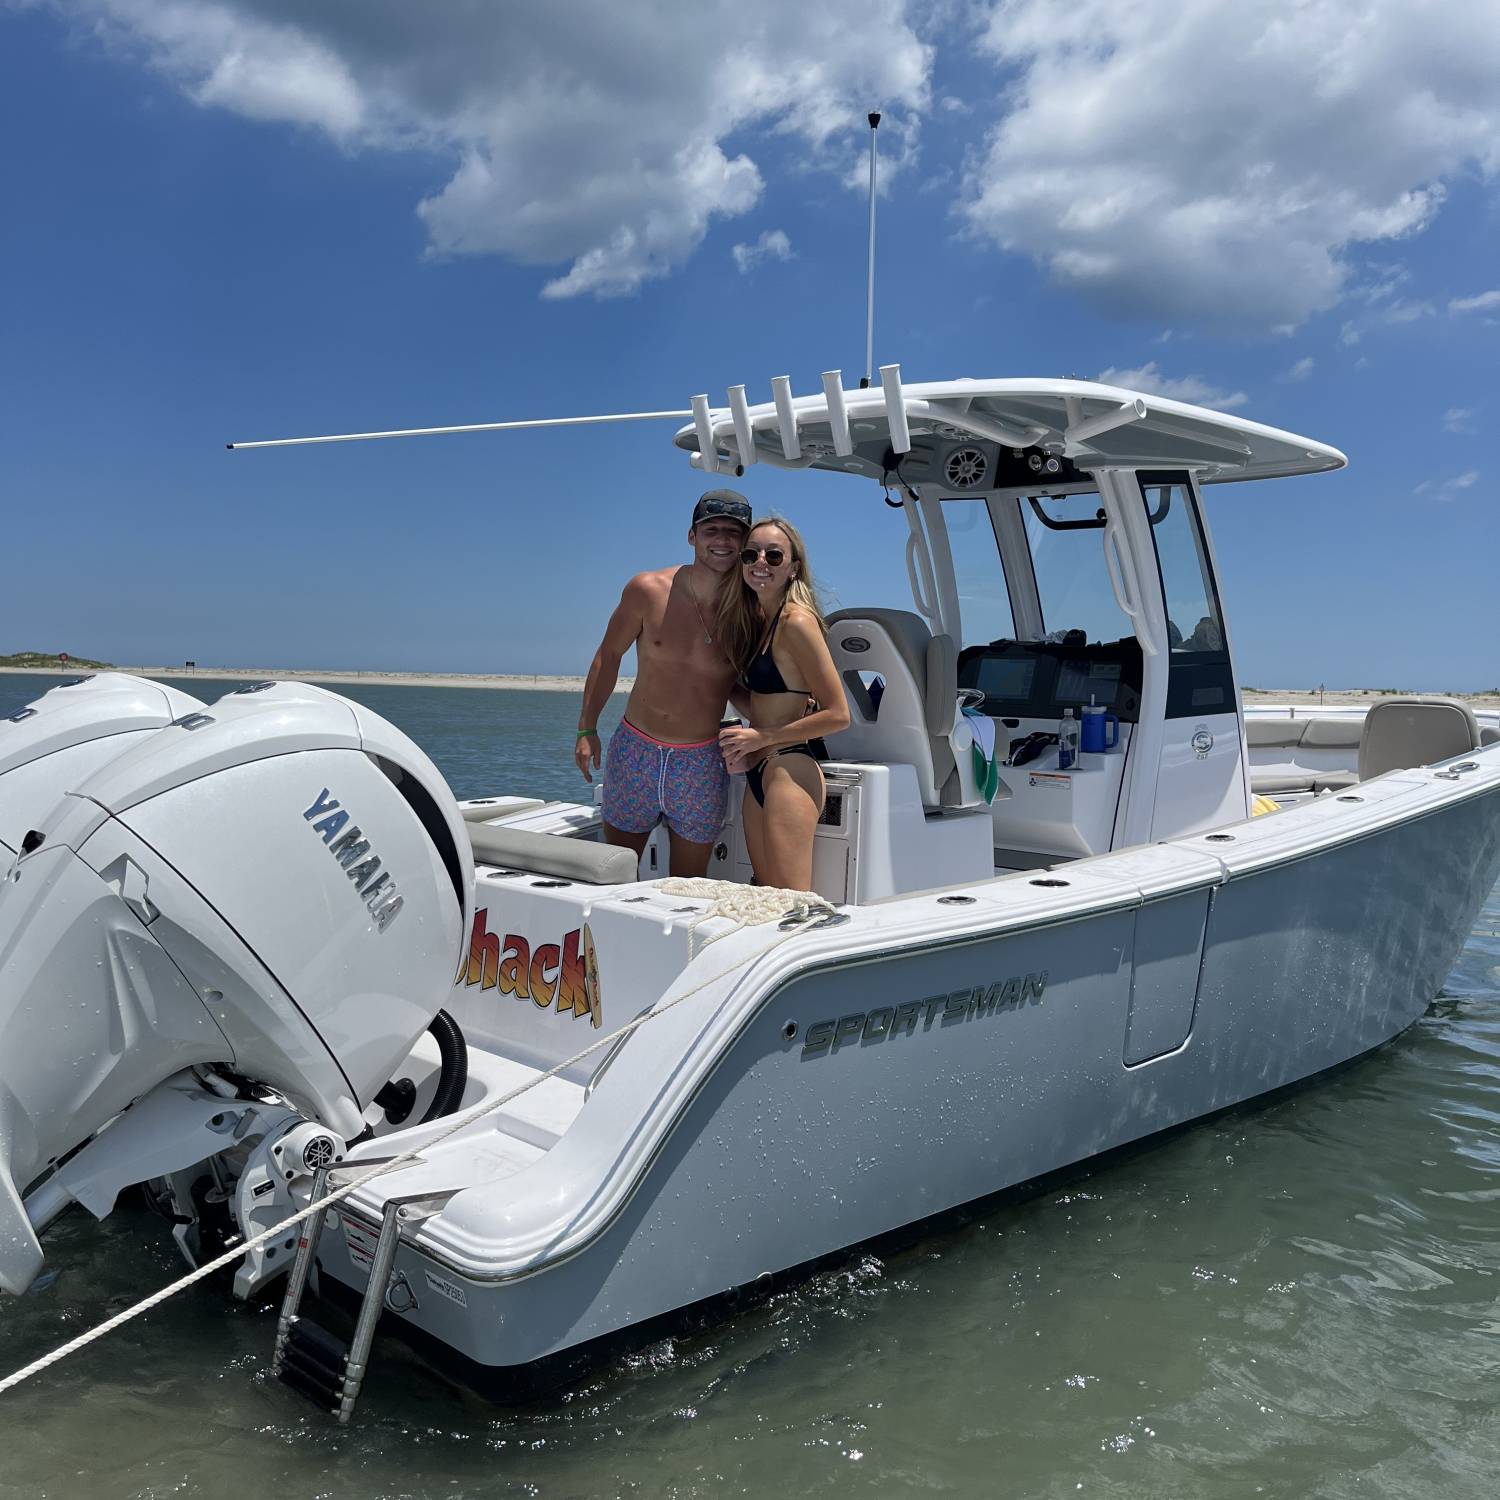 Title: The Shagshack - On board their Sportsman Open 262 Center Console - Location: Stone harbor. Participating in the Photo Contest #SportsmanJuly2024